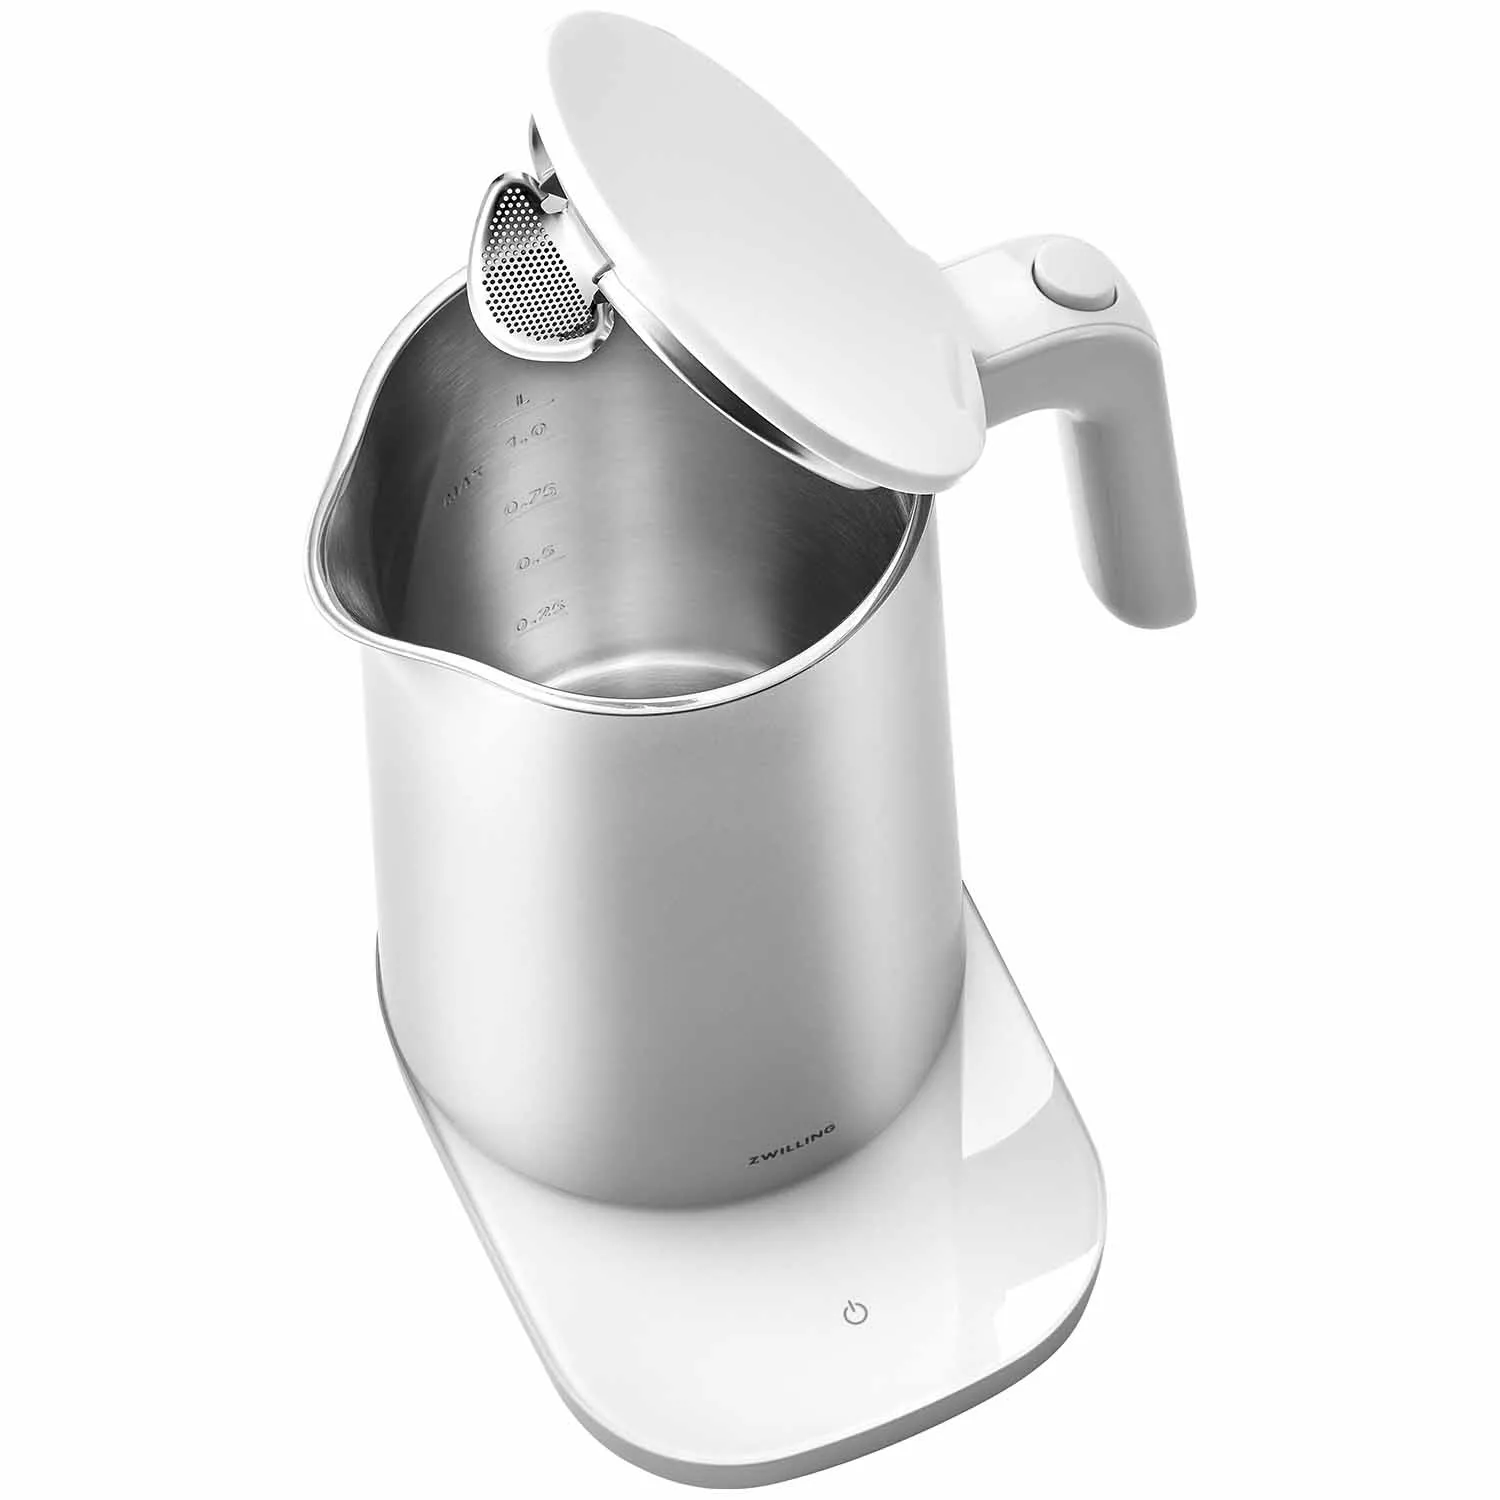 Zwilling Enfinigy Cool Touch Electric Kettle Pro, 1 Liter